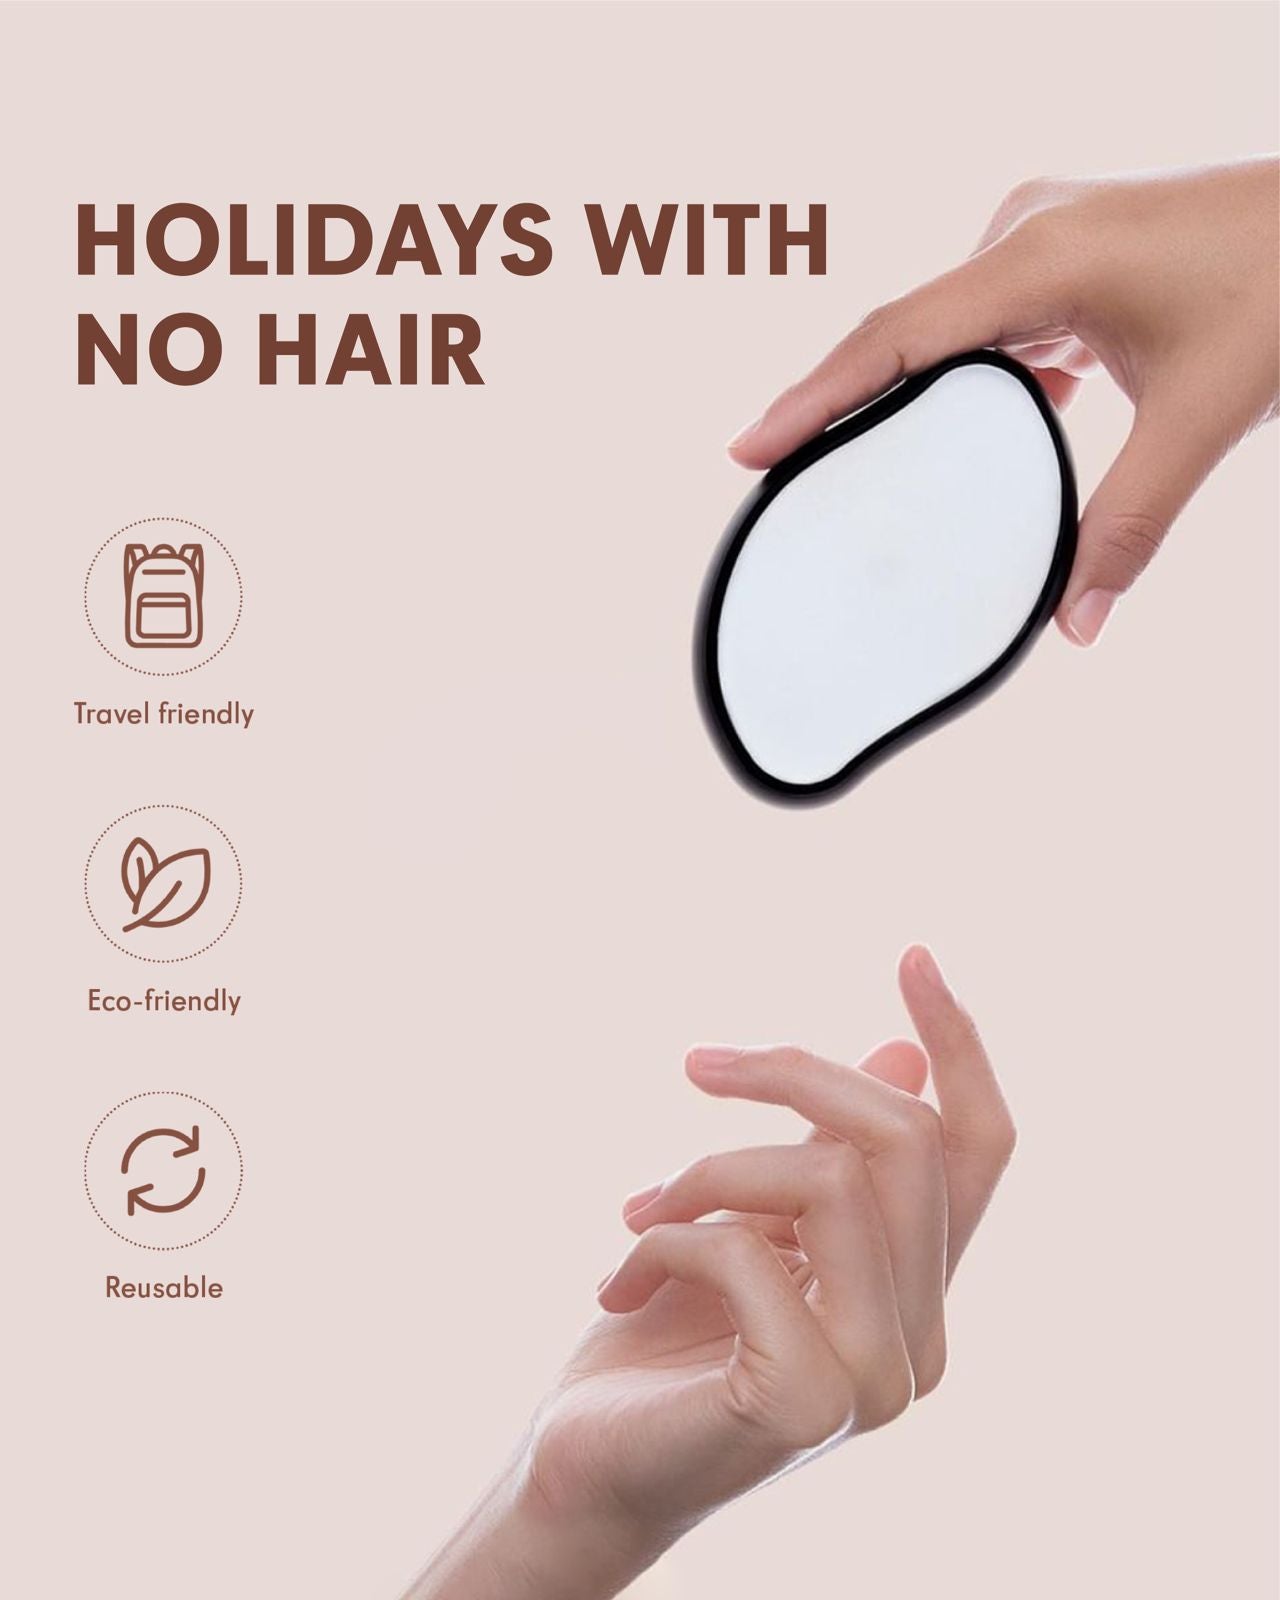 Crystal Hair Remover - BUY 1 GET 1 FREE